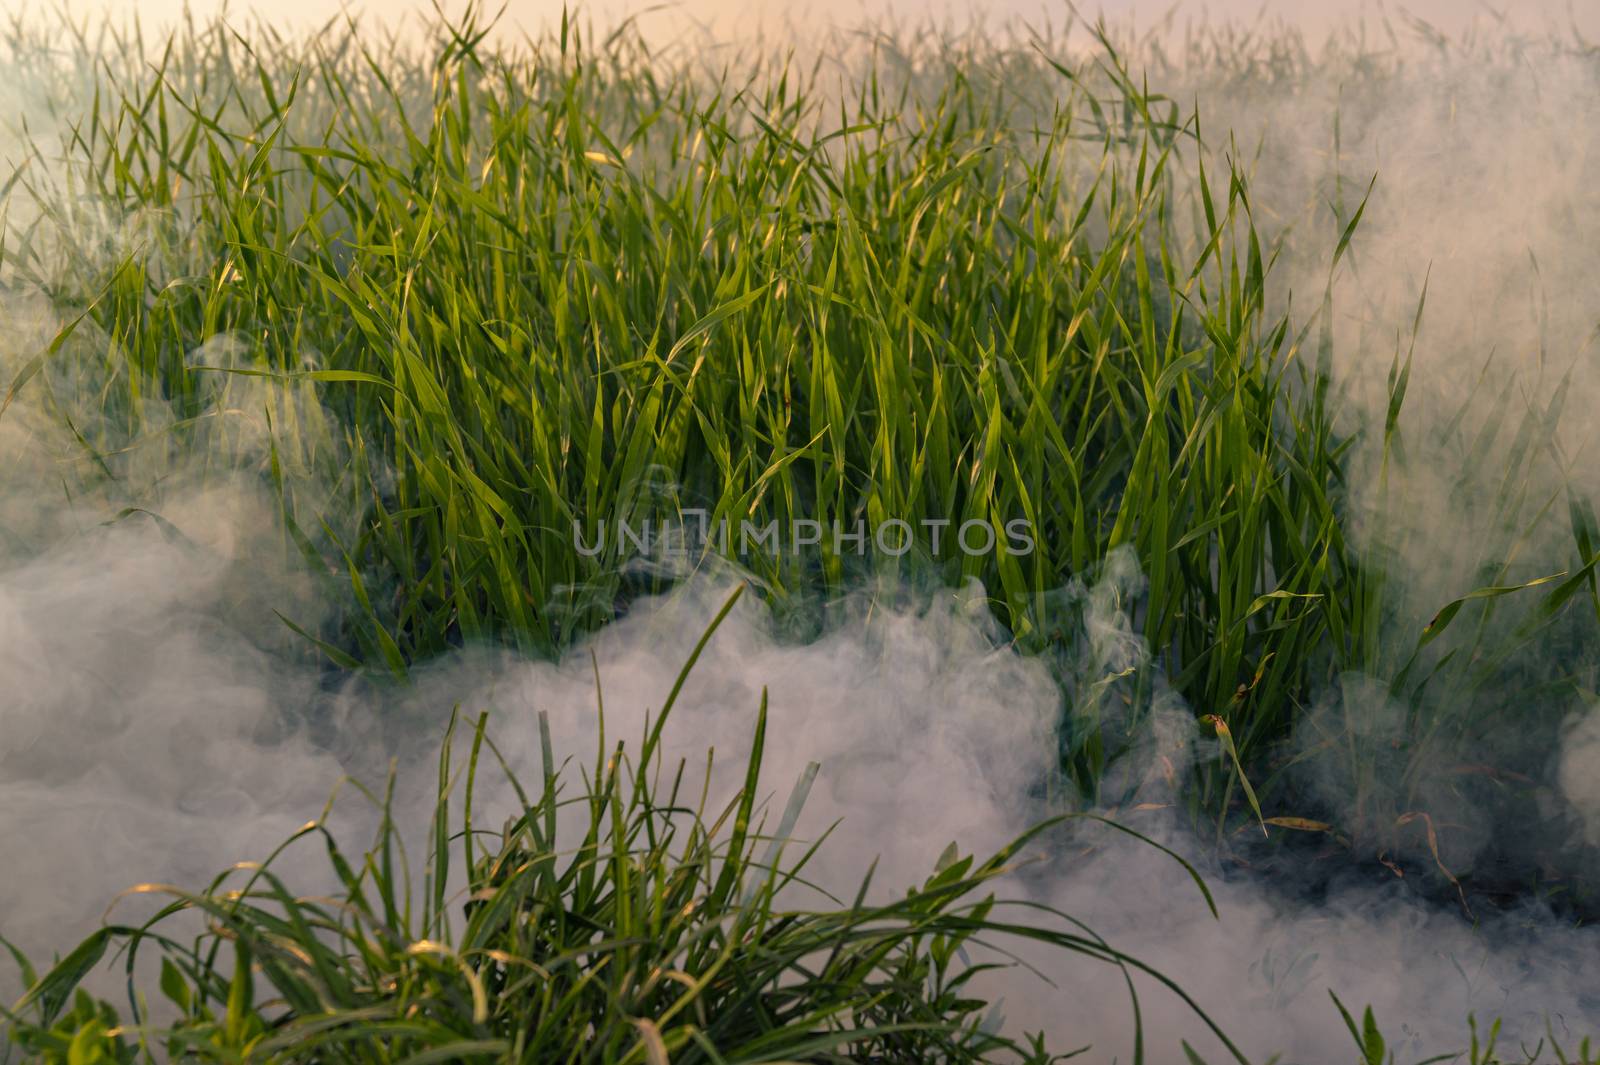 The white smoke in grass from smoke bomb against evening sun. 